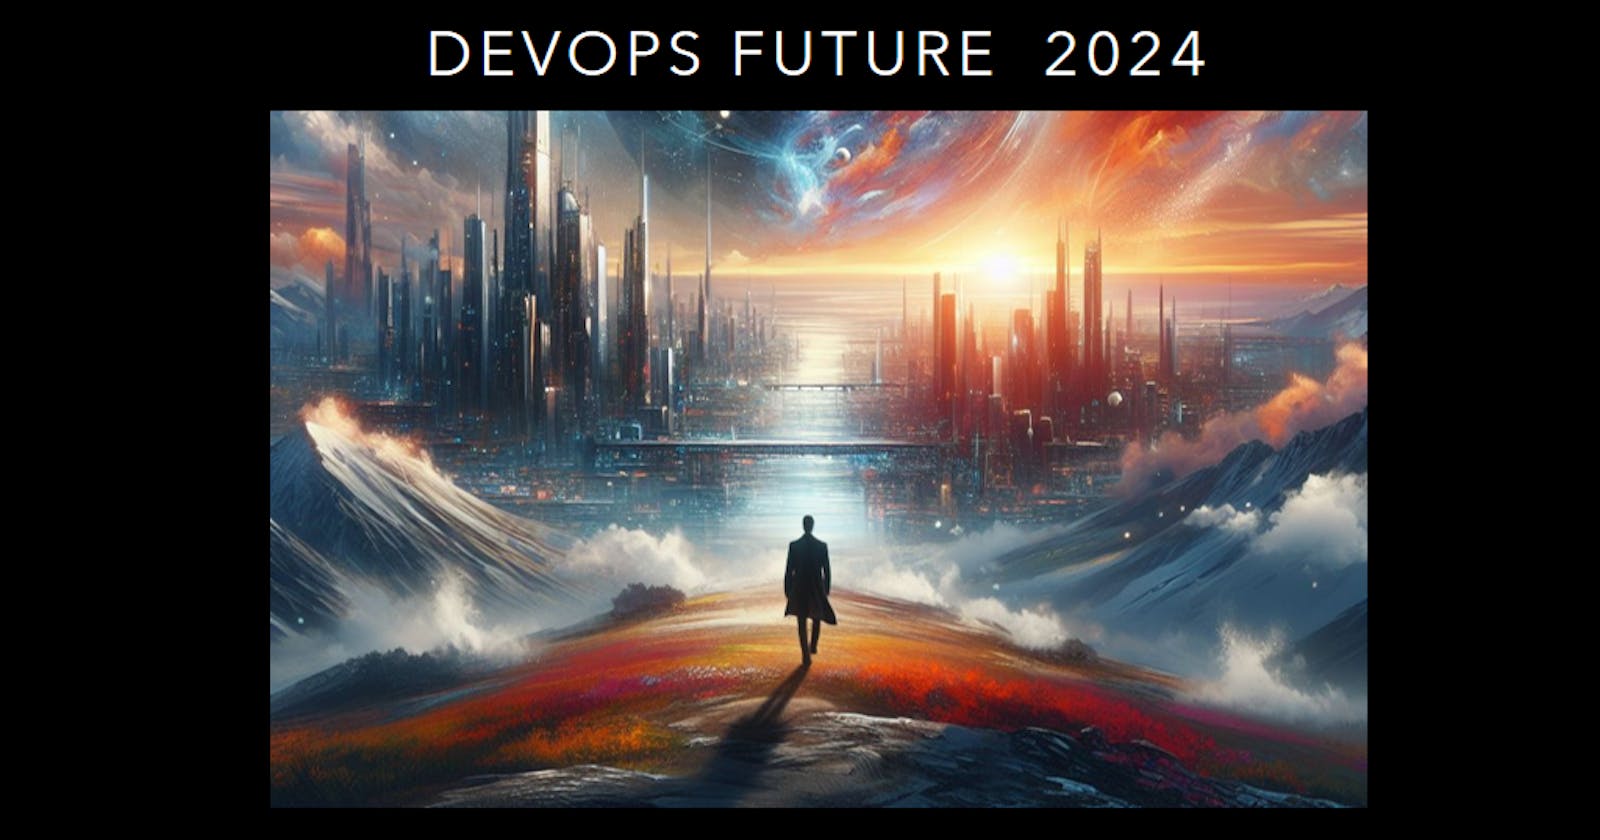 2024: Buckle Up for the DevOps & Cloud Boom – Are You Ready for Liftoff?